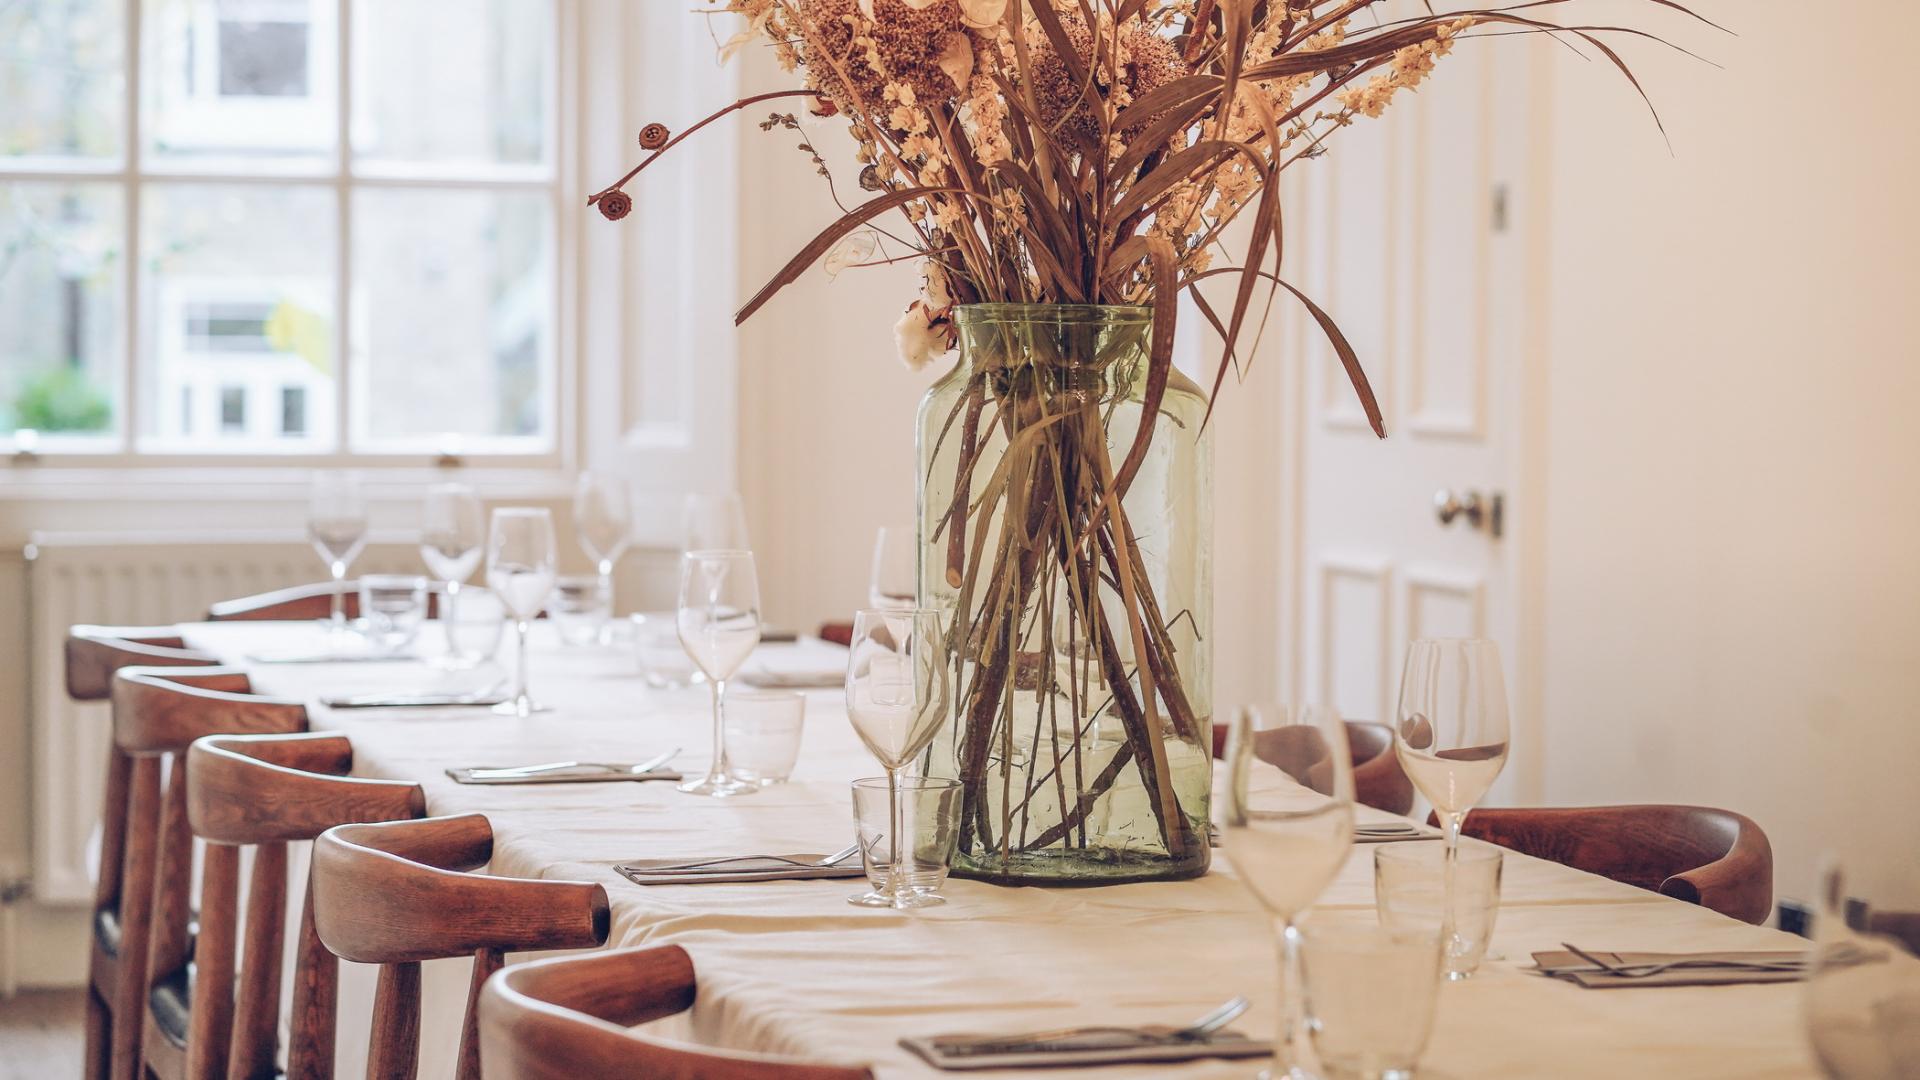 Private Dining Rooms for Birthdays in London